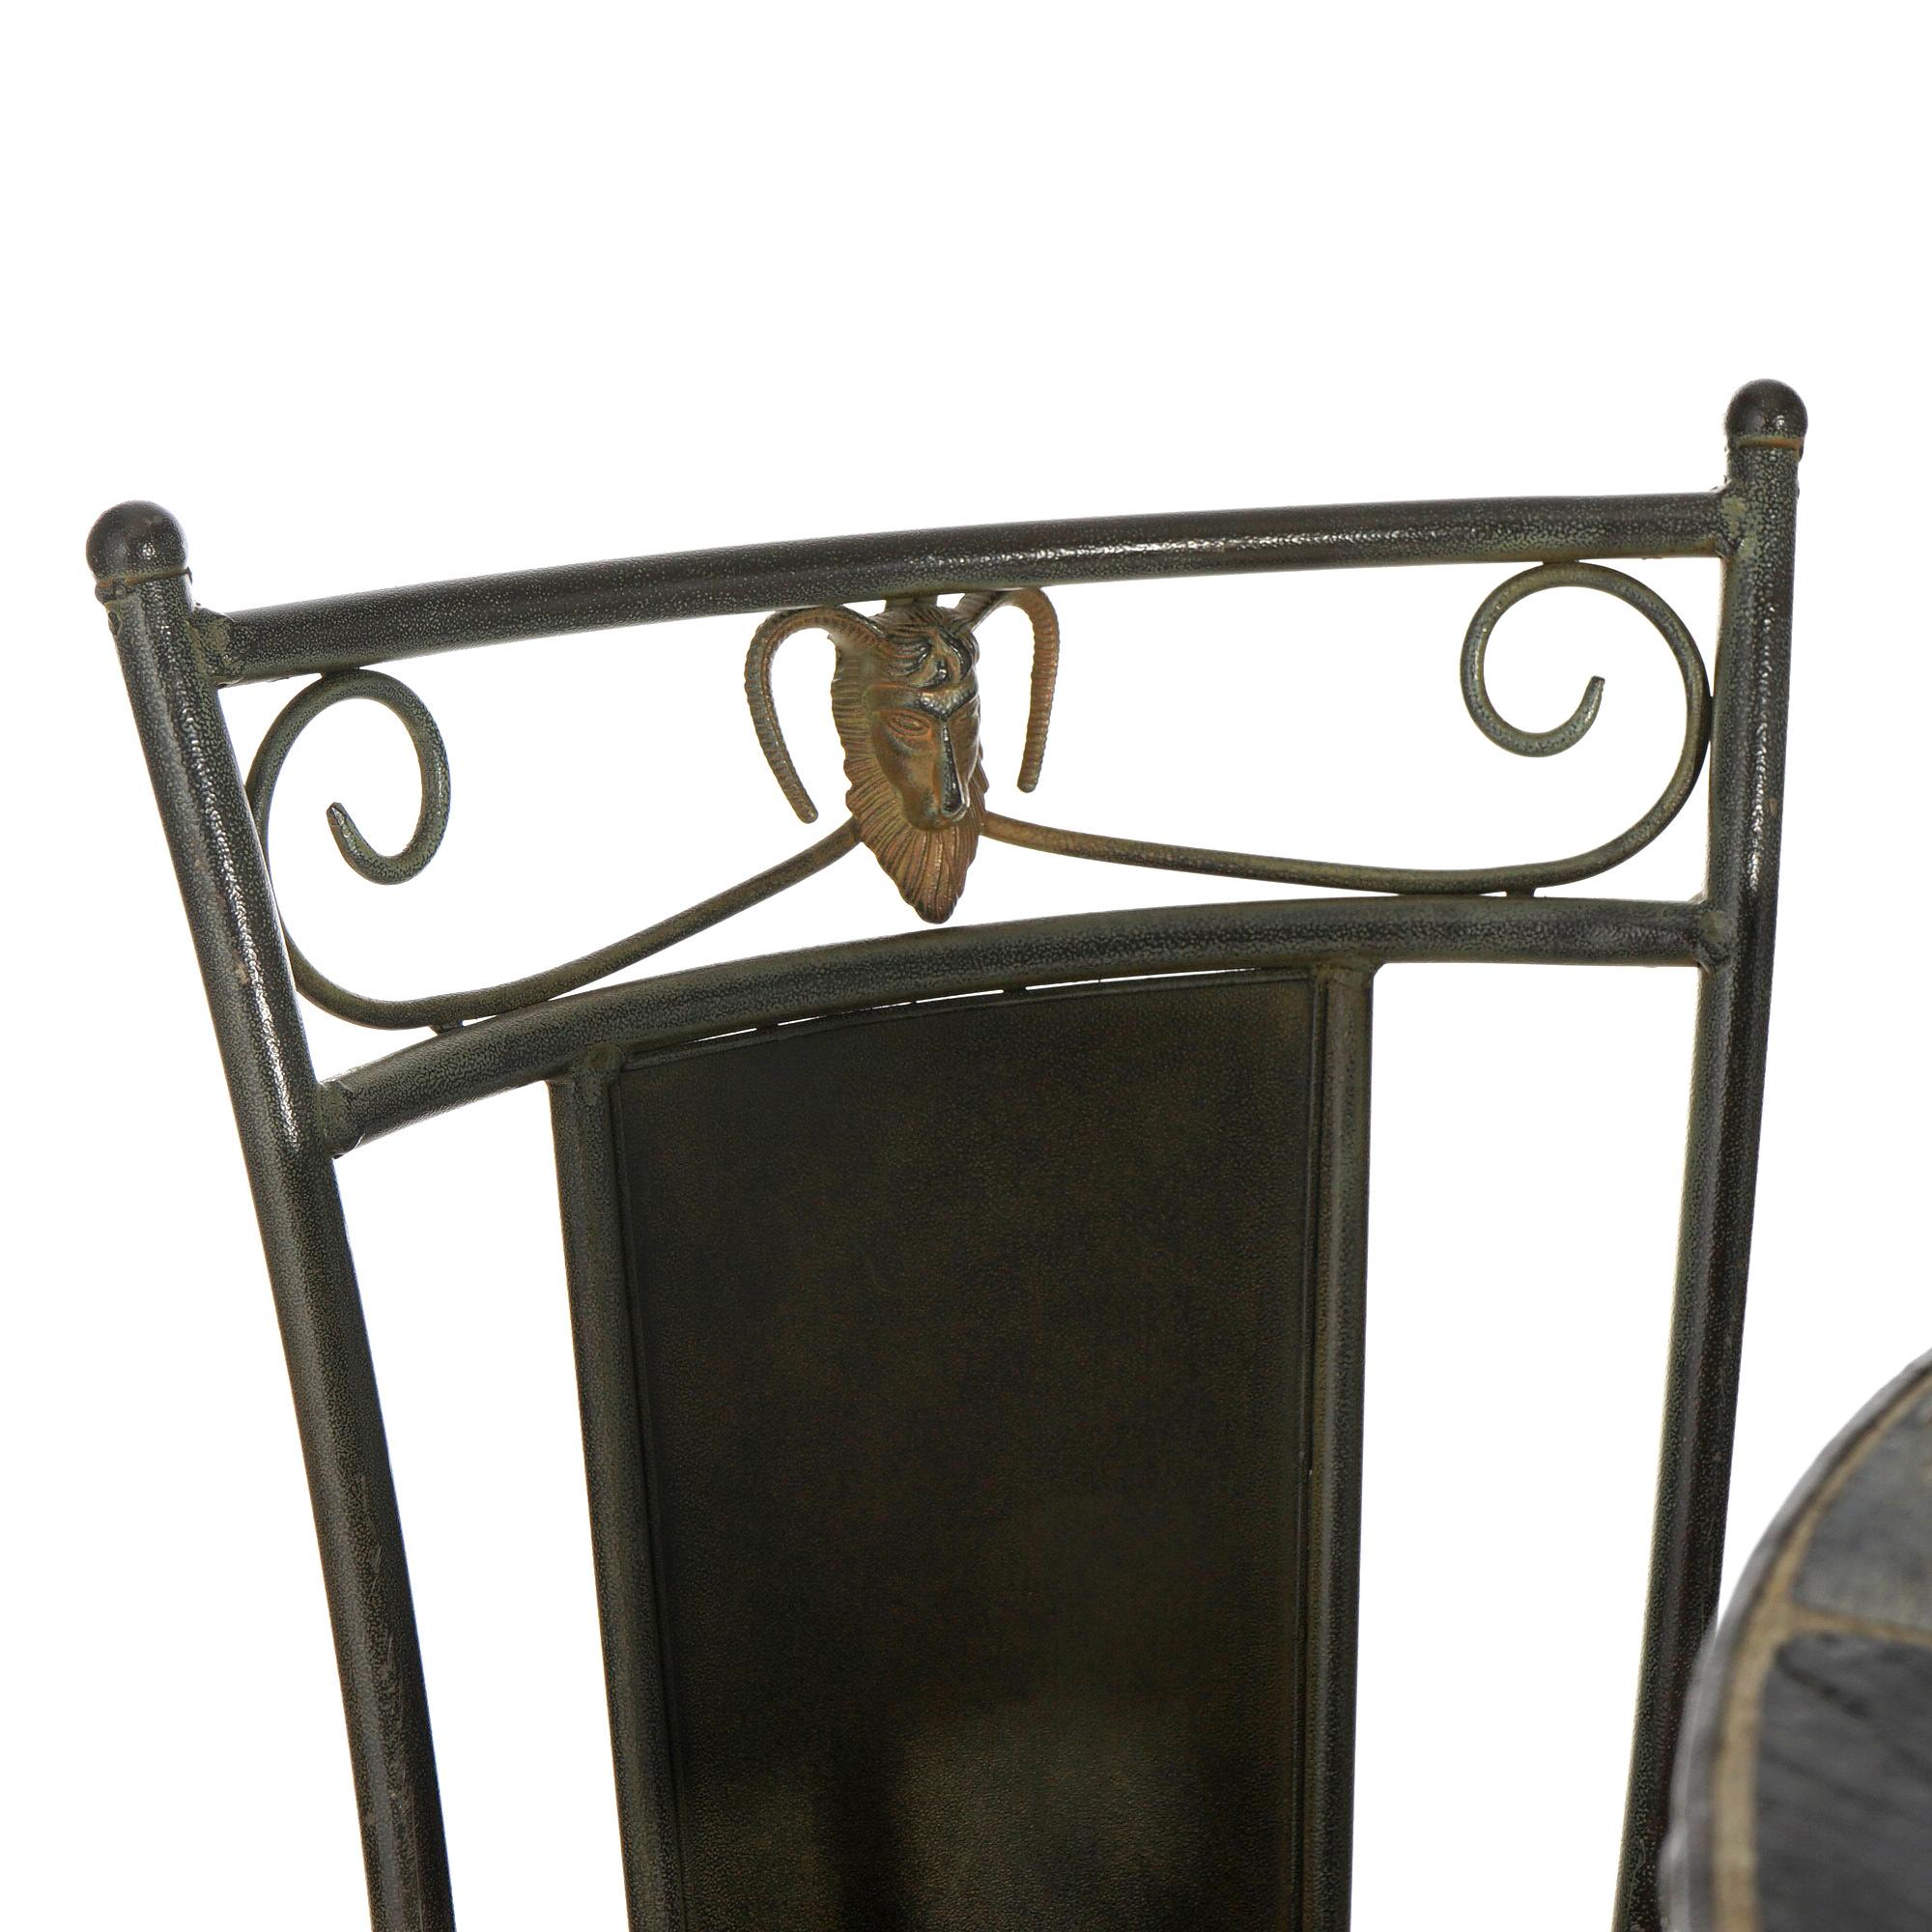 Figural Wrought Iron & Slate Pub Table & Chairs with Satyr Heads & Hoof Feet 4